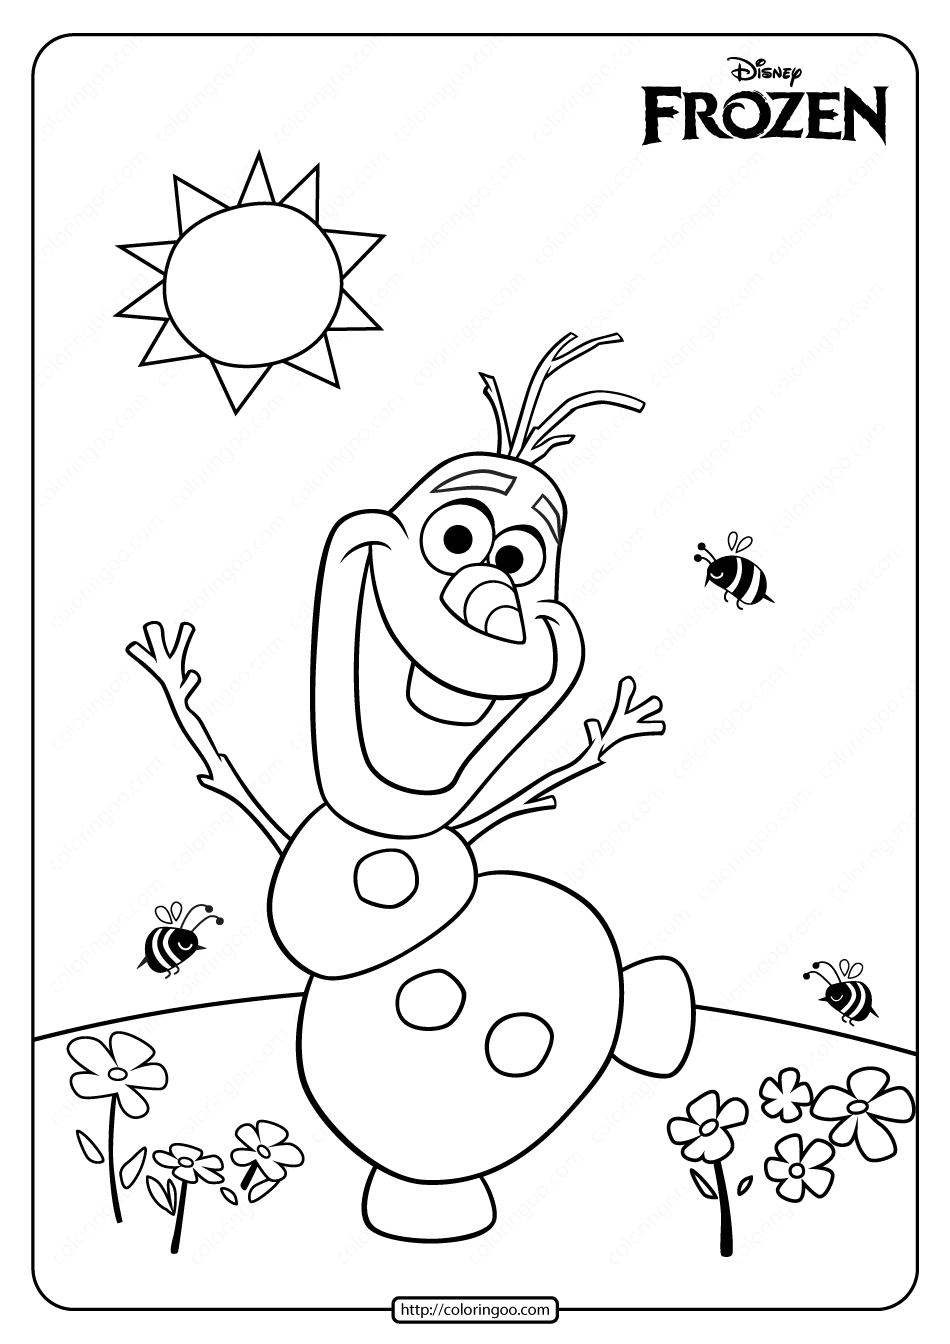 printable disney frozen olaf summer coloring page